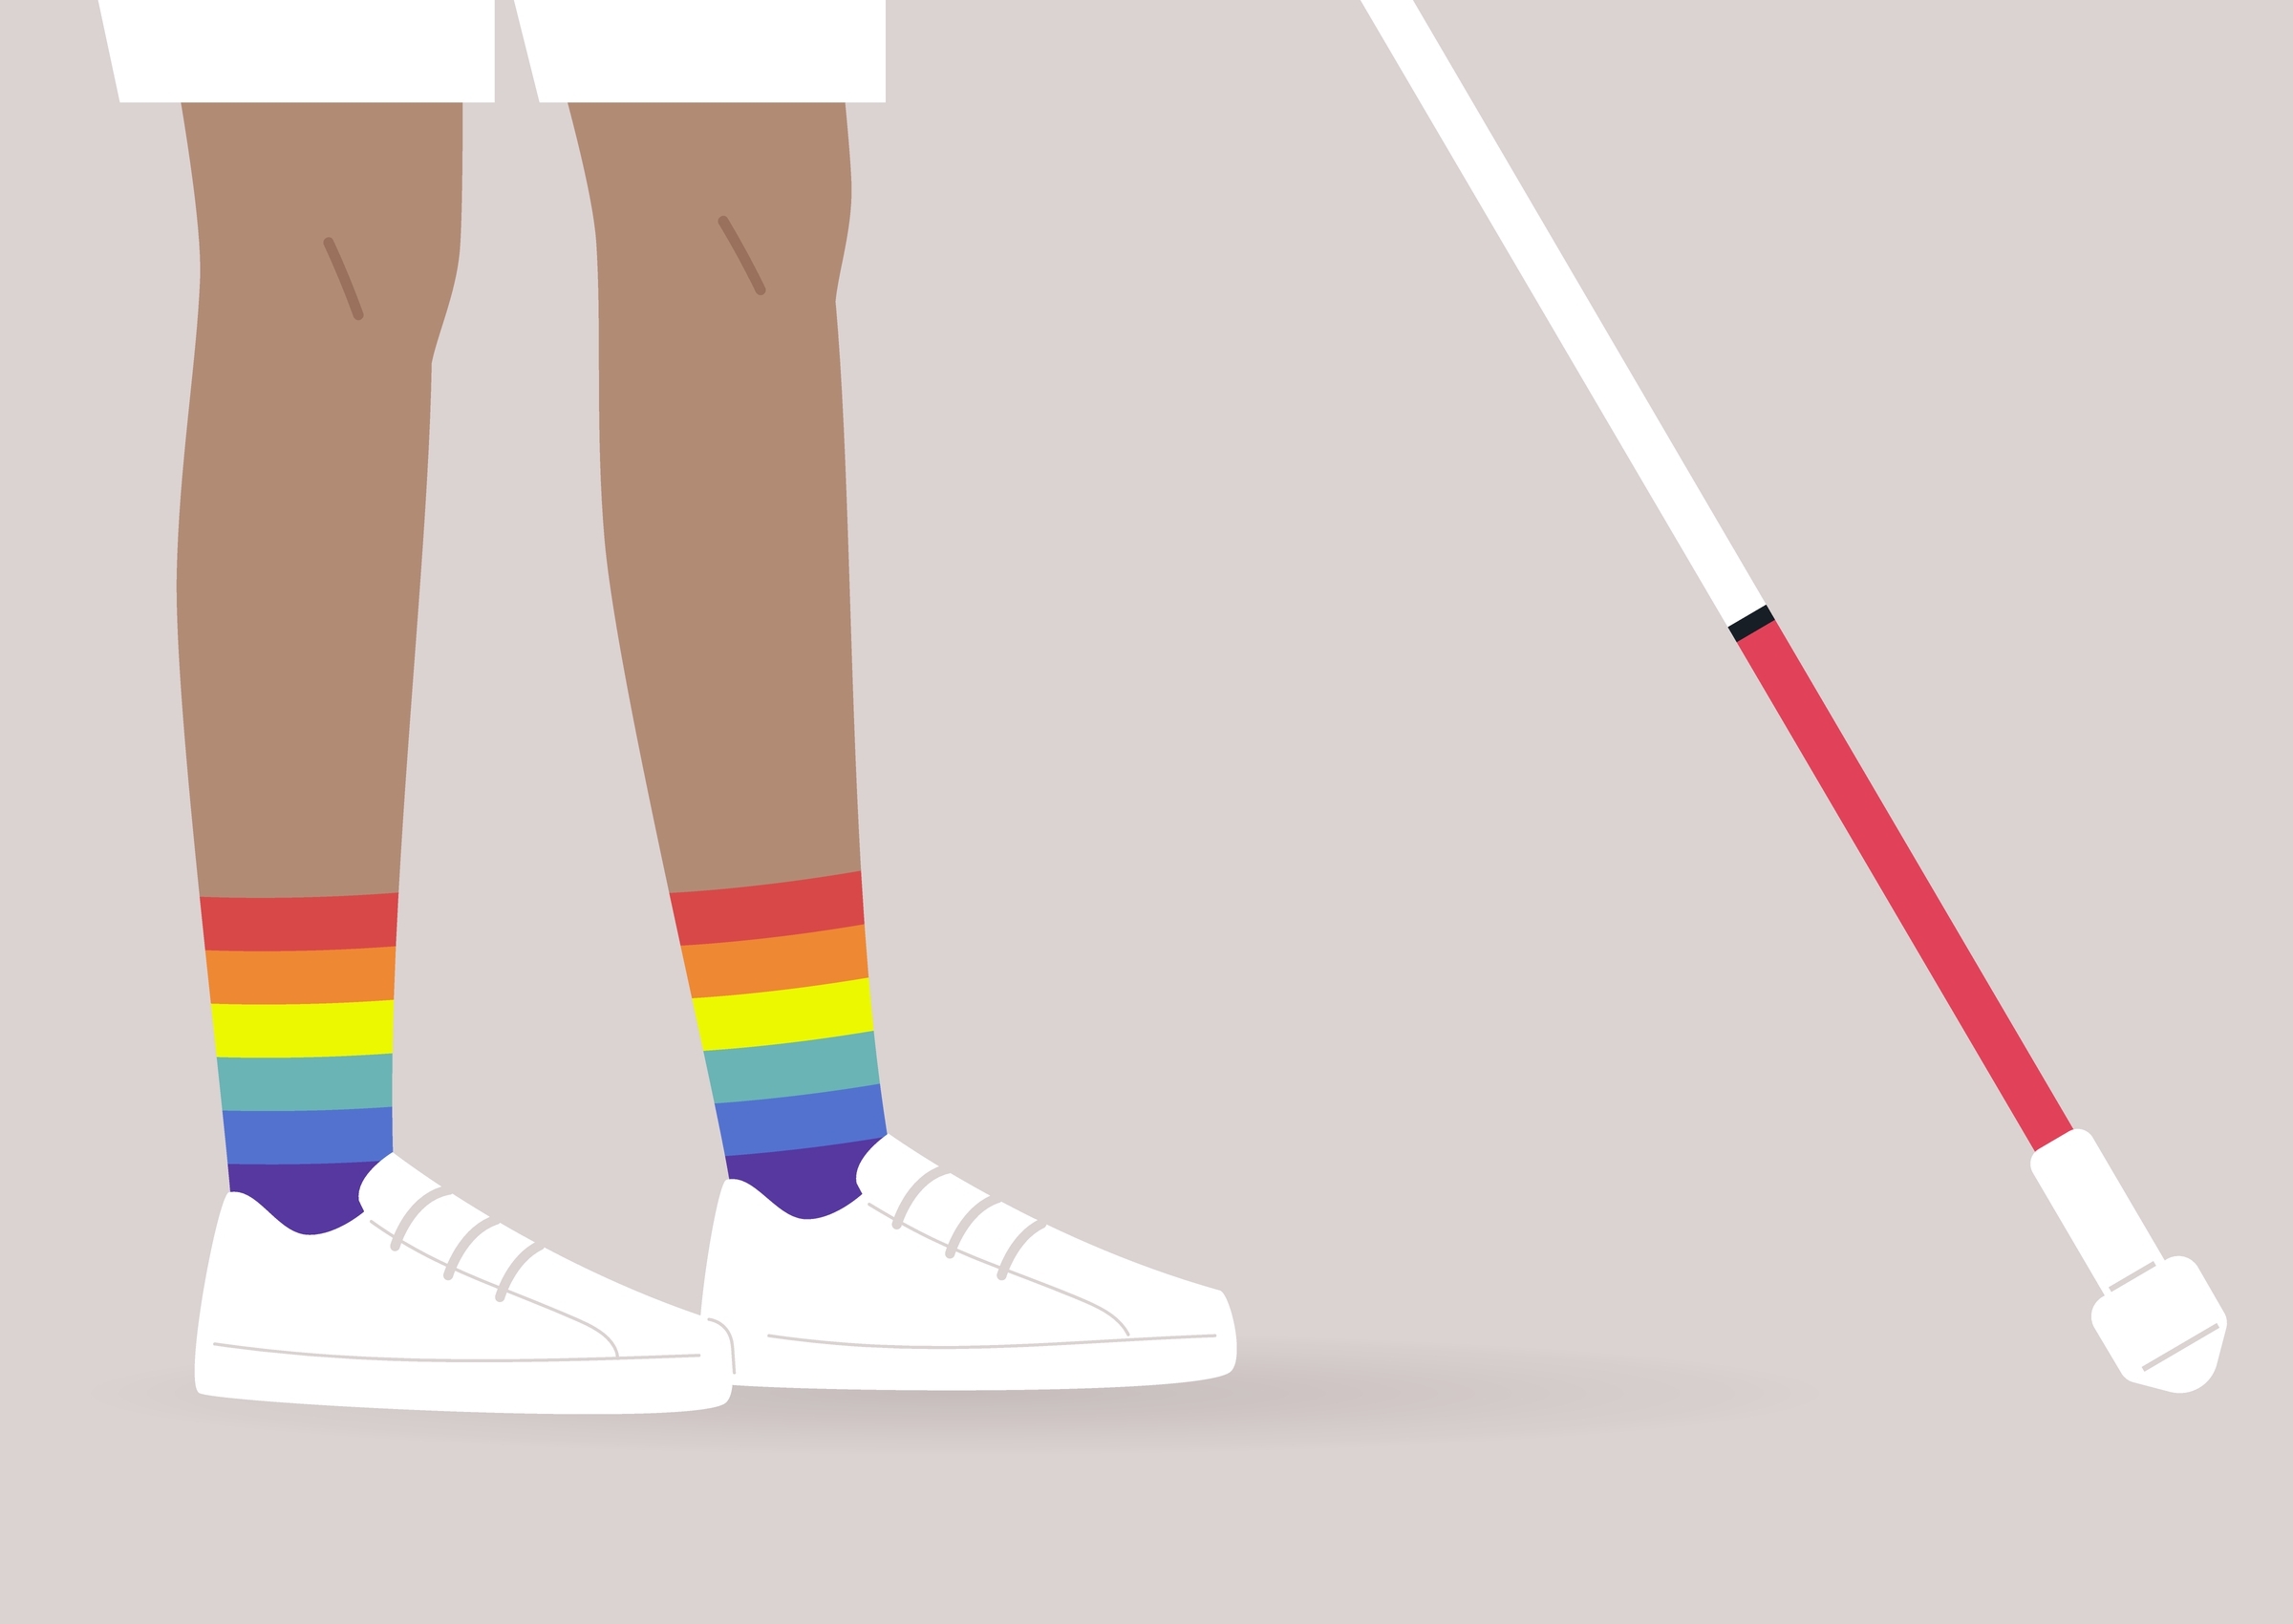 Illustration of a brown-skinned person's legs and feet. They're wearing white shorts and white sneakers with rainbow patterned socks. They have a white cane.